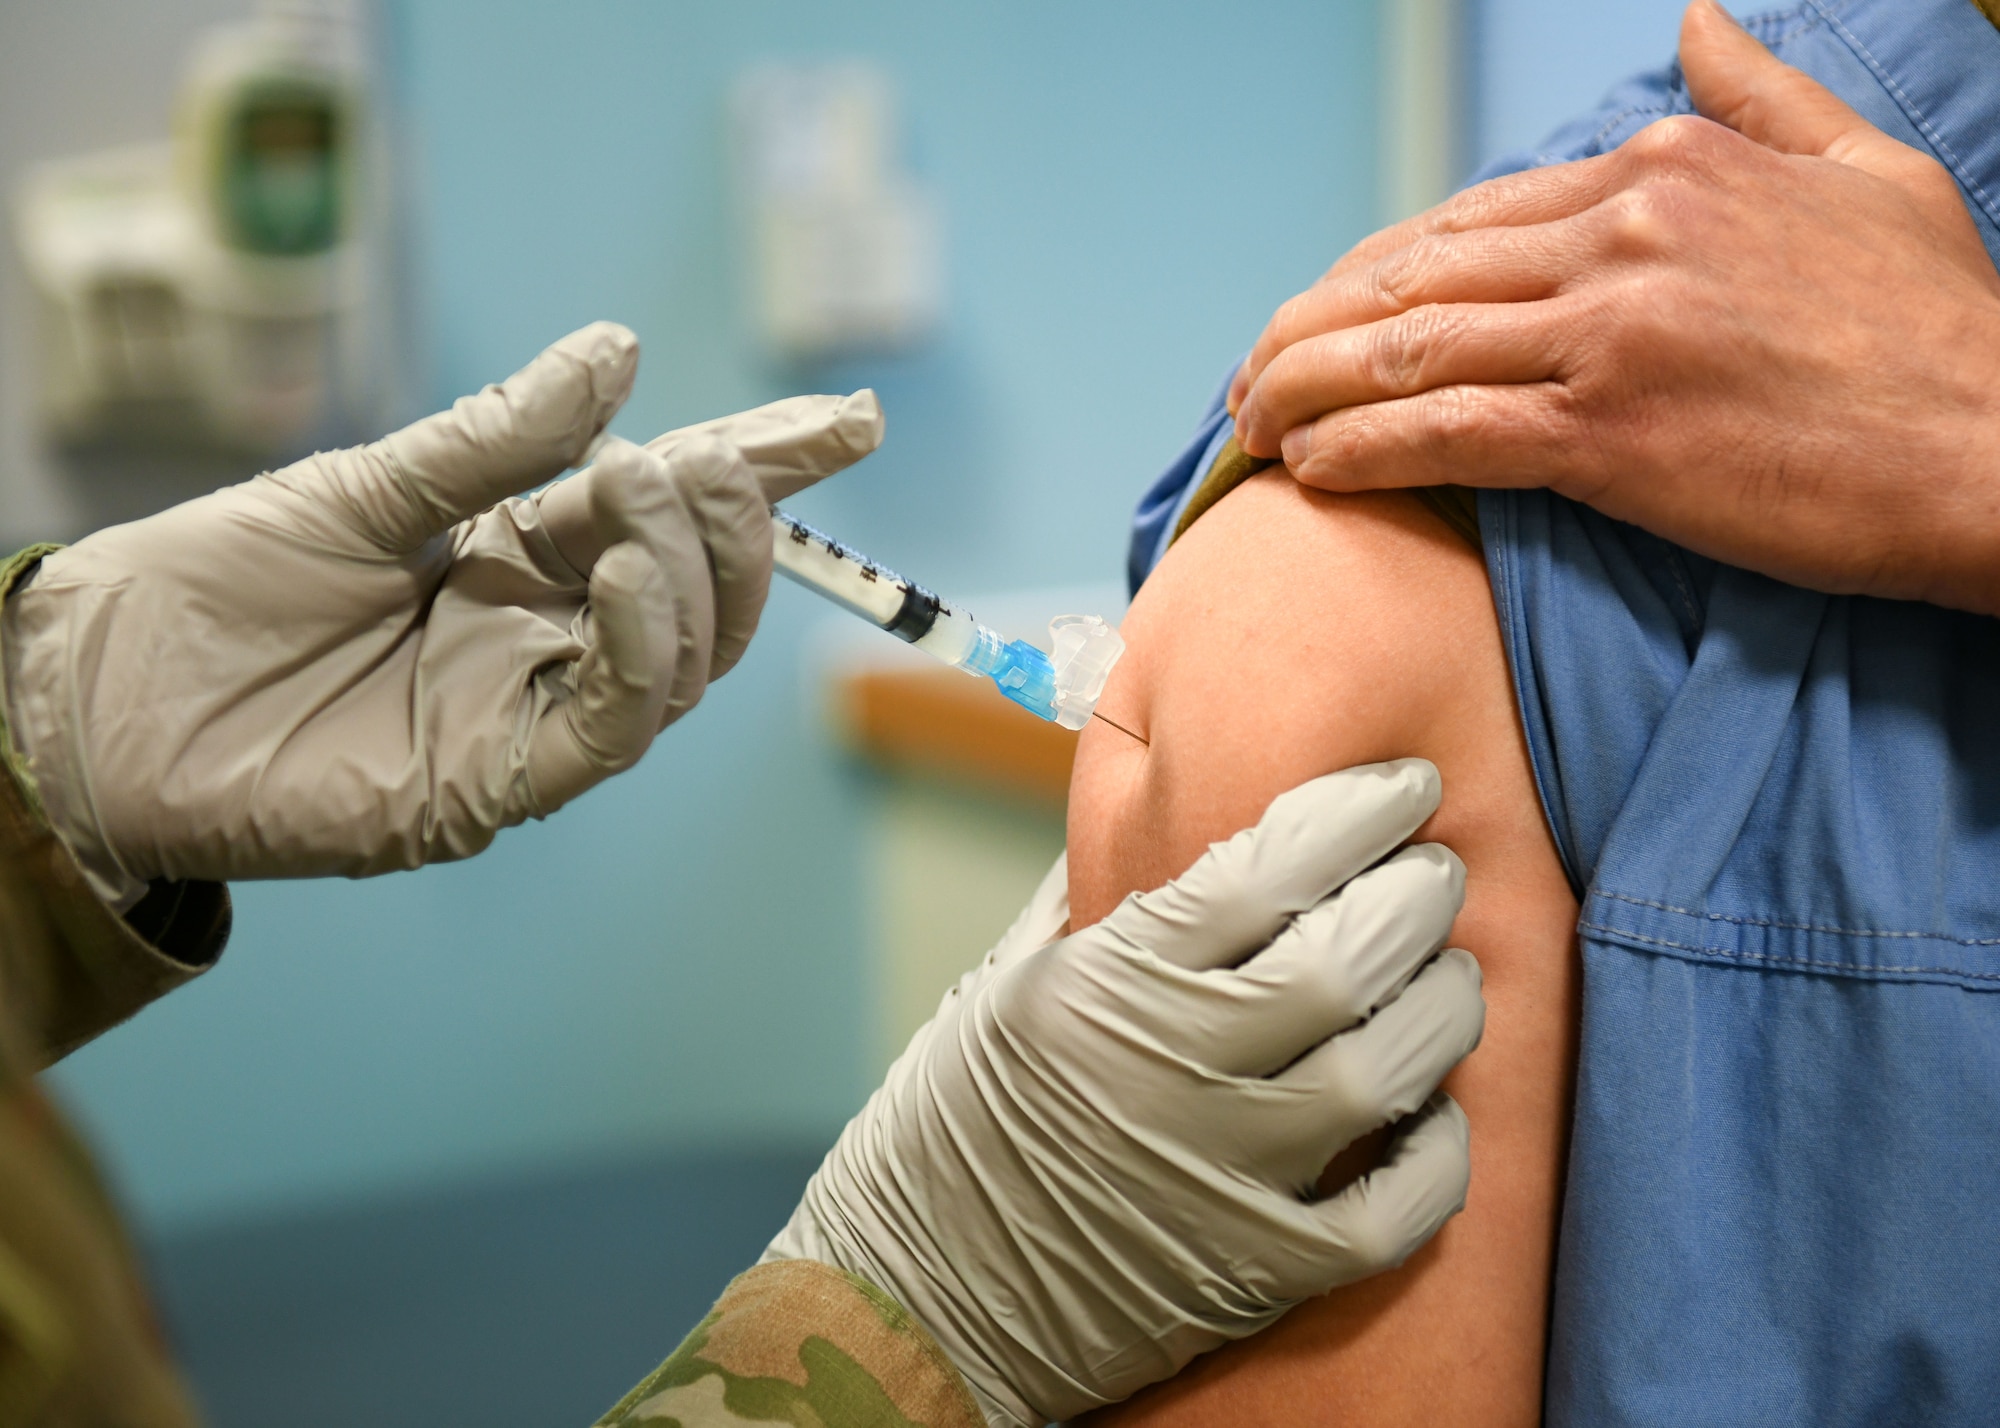 An Airman assigned to the 48th Fighter Wing Medical Group receives the COVID-19 vaccine at Royal Air Force Lakenheath, England, Dec.29, 2020. Initial vaccinations will be limited to healthcare workers and first responders to assess the process and will be used to plan an expanded distribution phase, where each service will request and administer the vaccine through a Defense Department wide phased vaccination approach. (U.S. Air Force photo by Senior Airman Madeline Herzog)